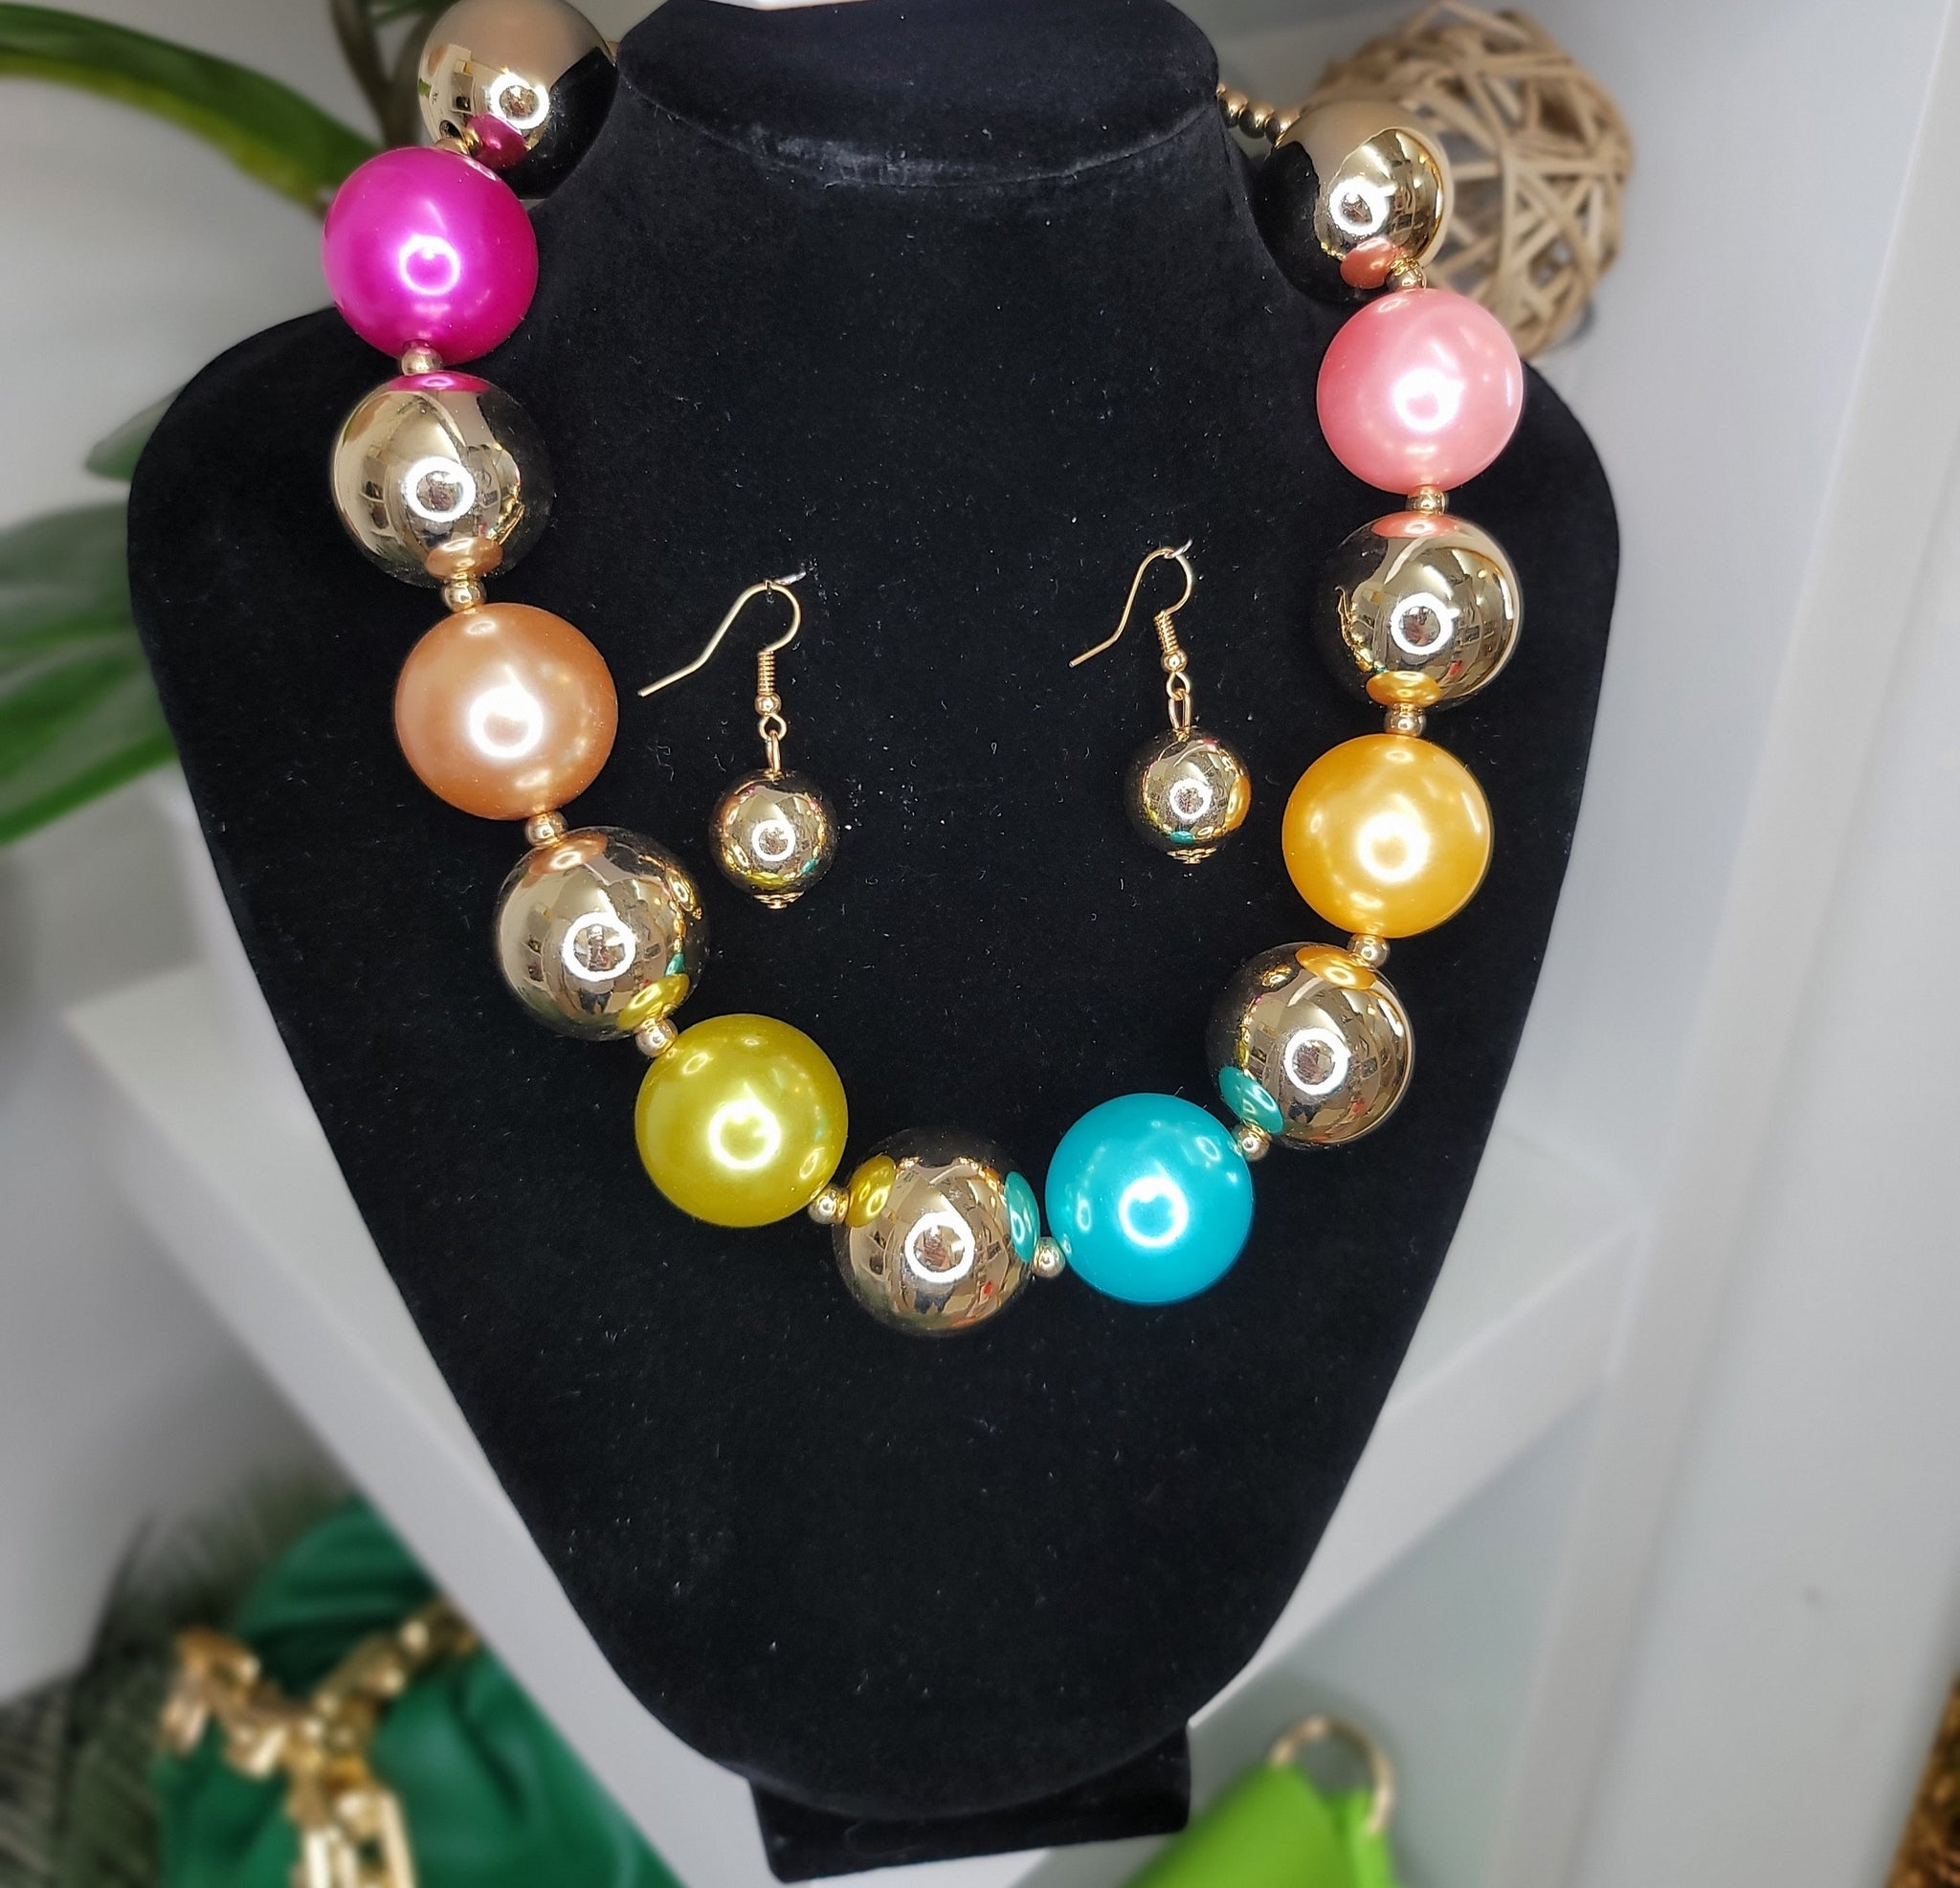 Dove handmade colorful pearl neck beads